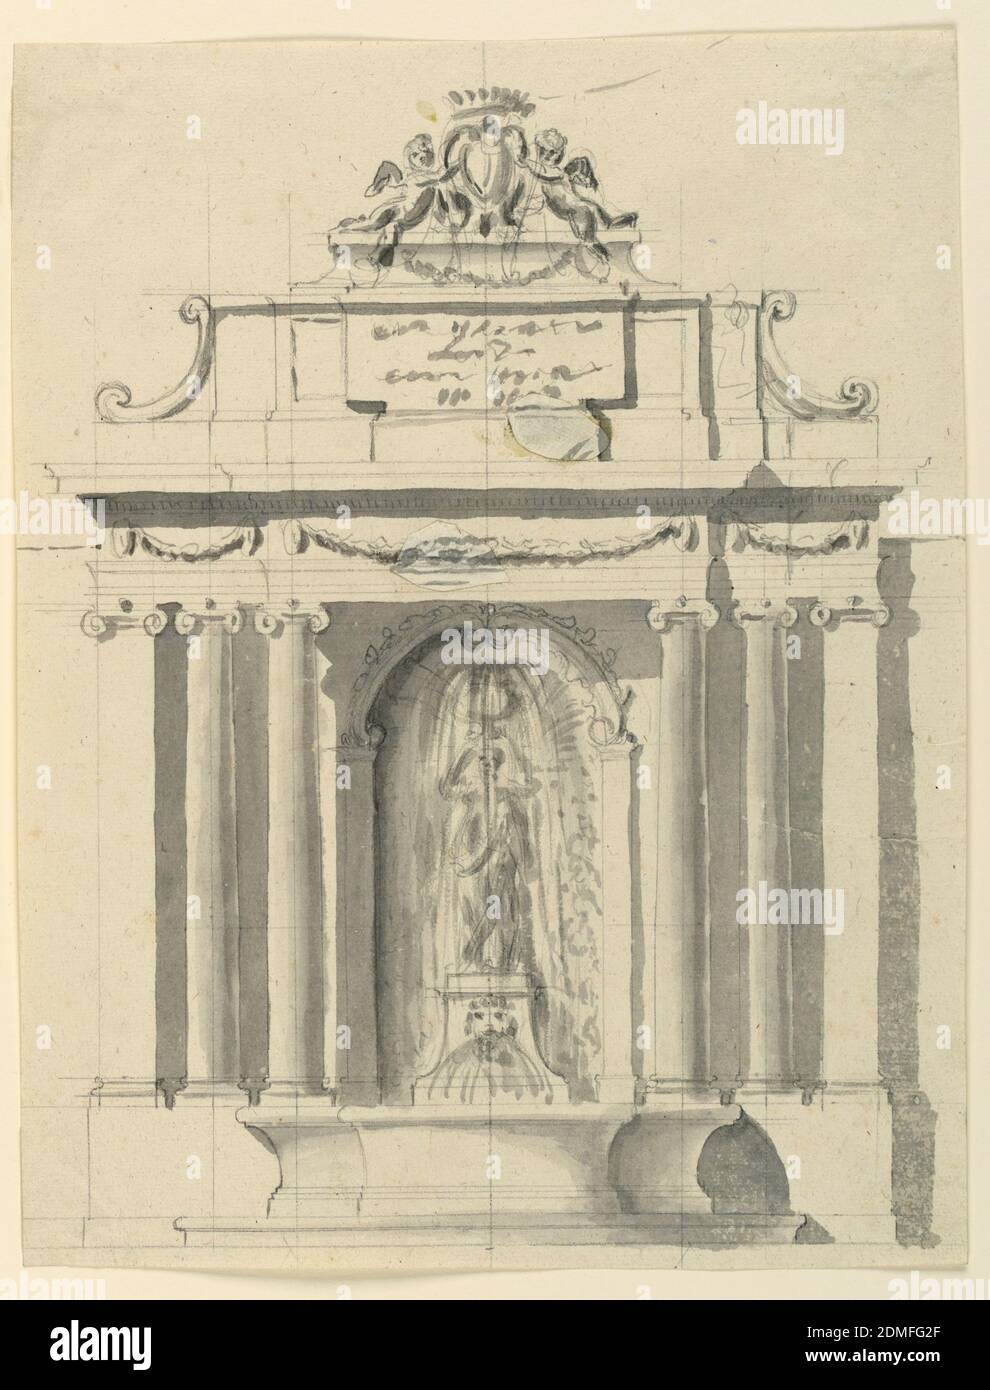 Wall Fountain, Graphite, brush and gray wash on laid paper, Rome, Italy, 1775, architecture, Drawing Stock Photo